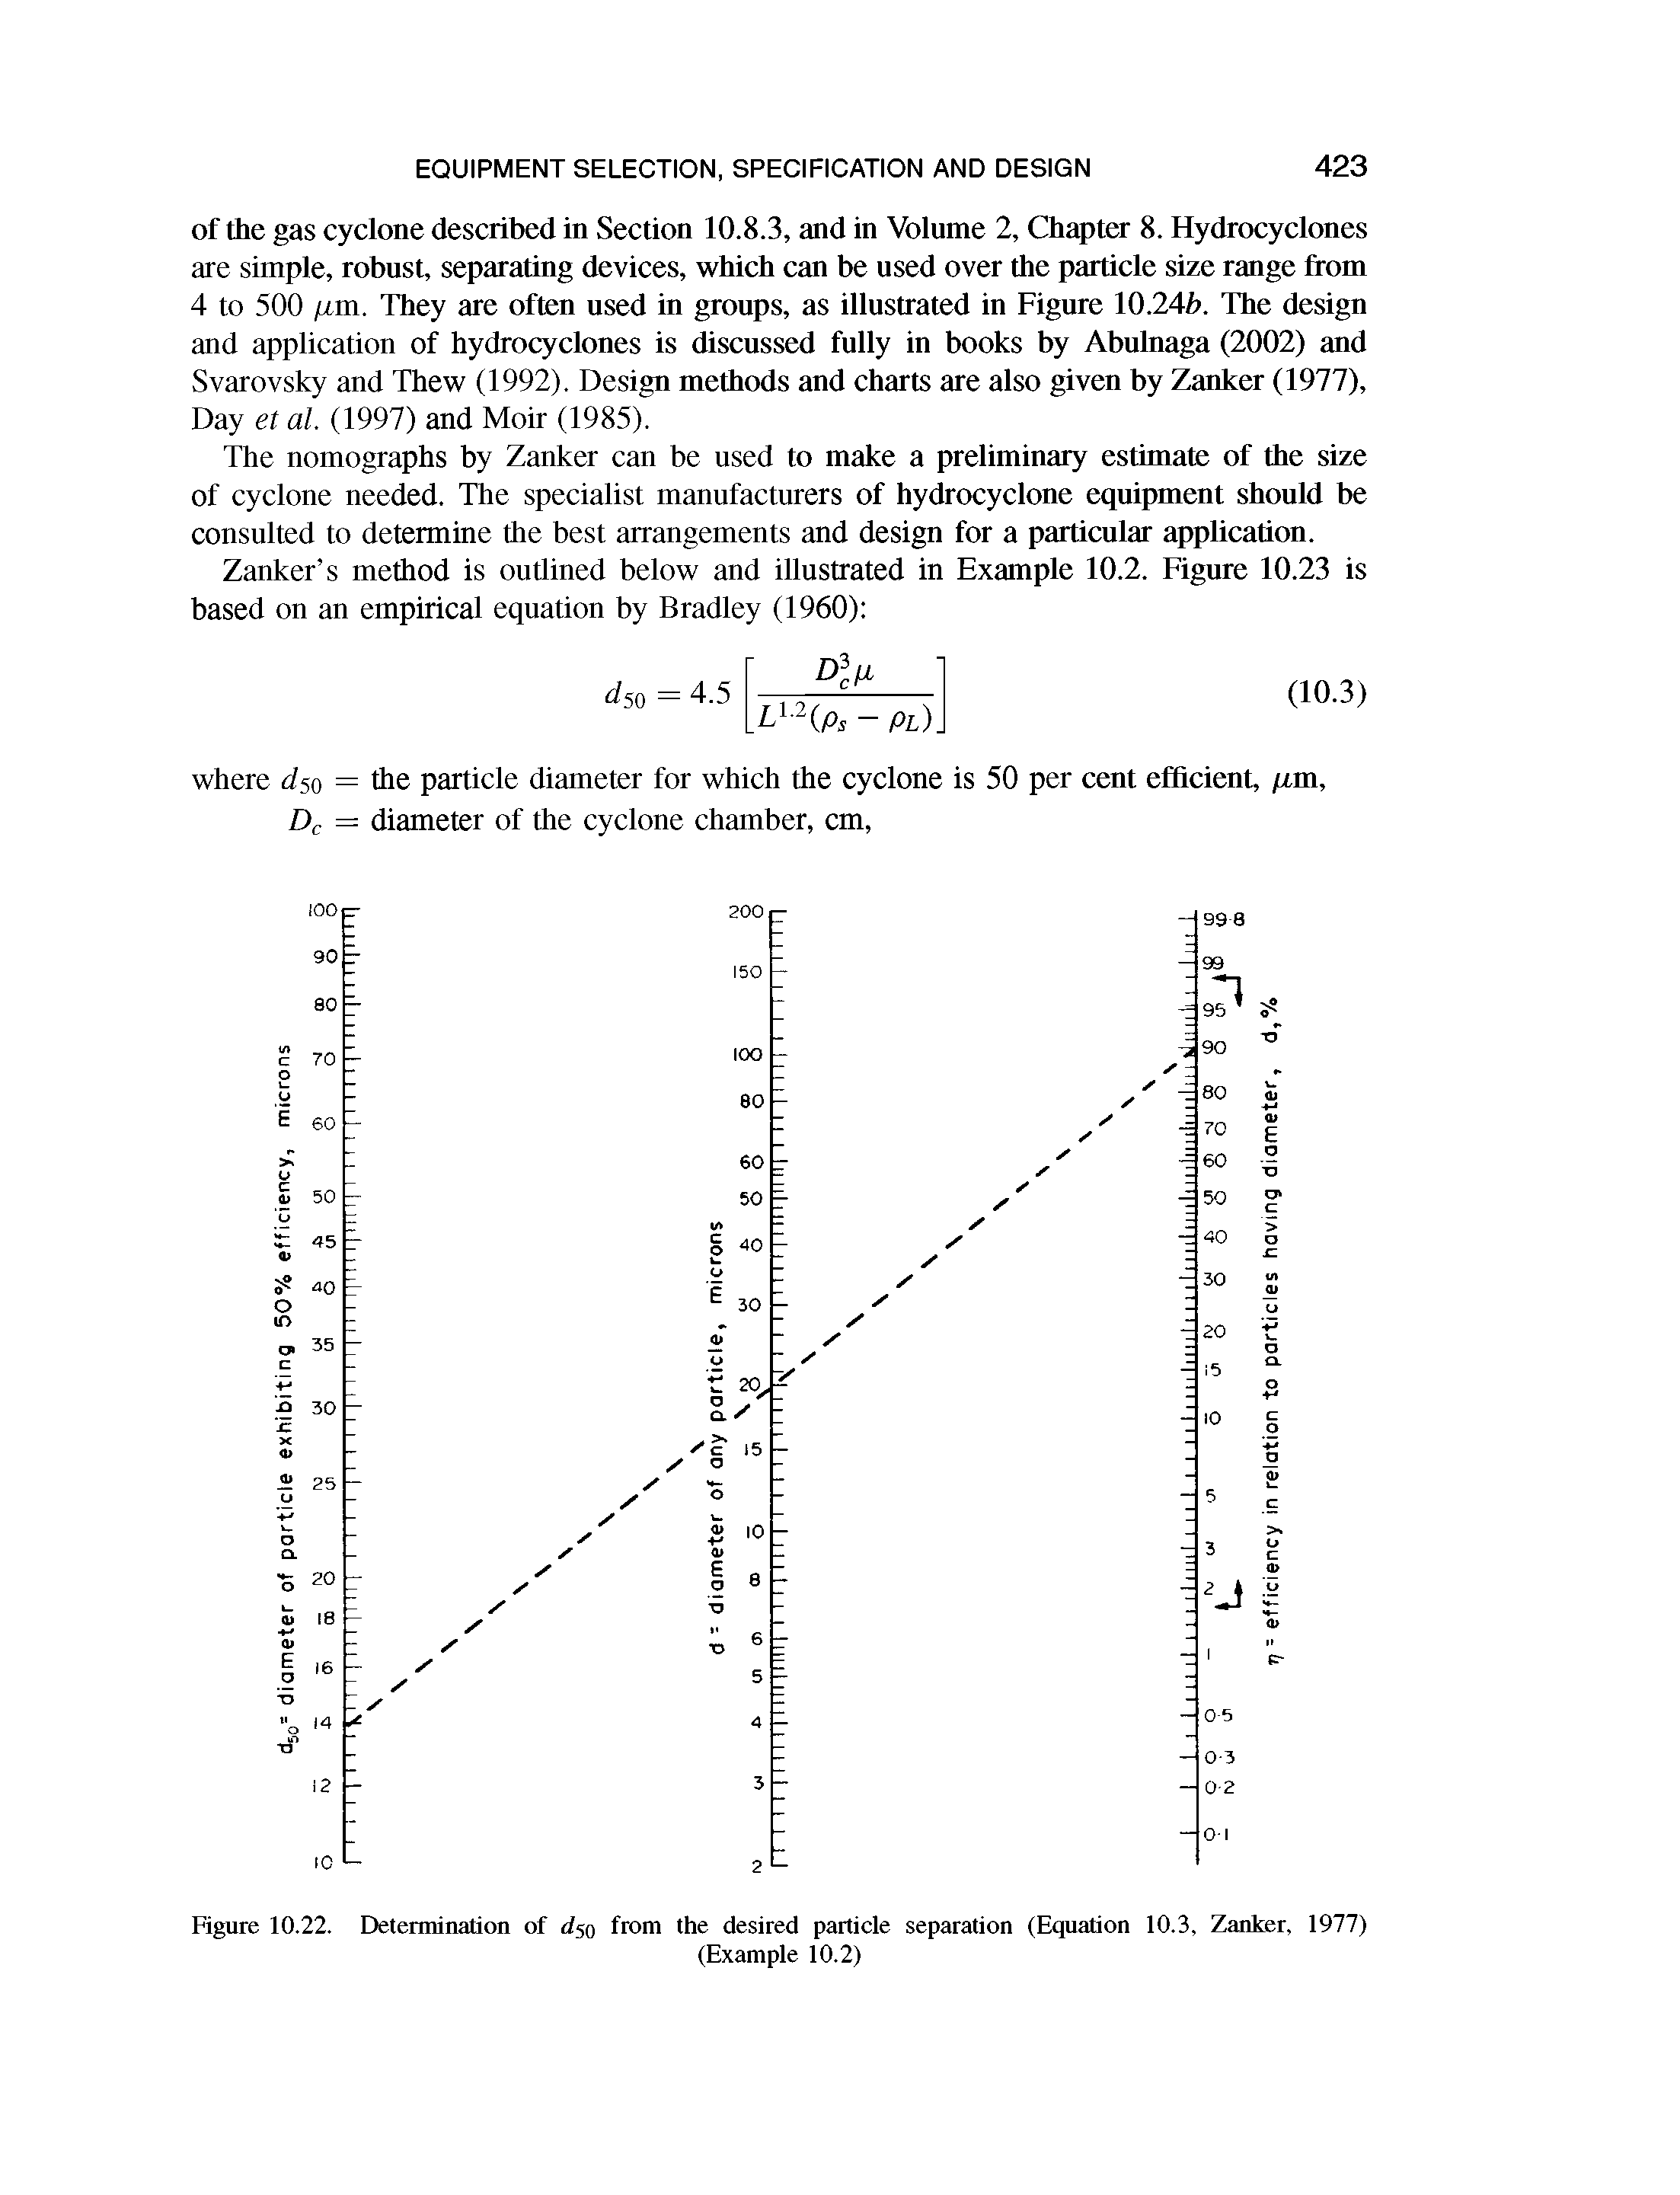 Figure 10.22. Determination of J50 from the desired particle separation (Equation 10.3, Zanker, 1977)...